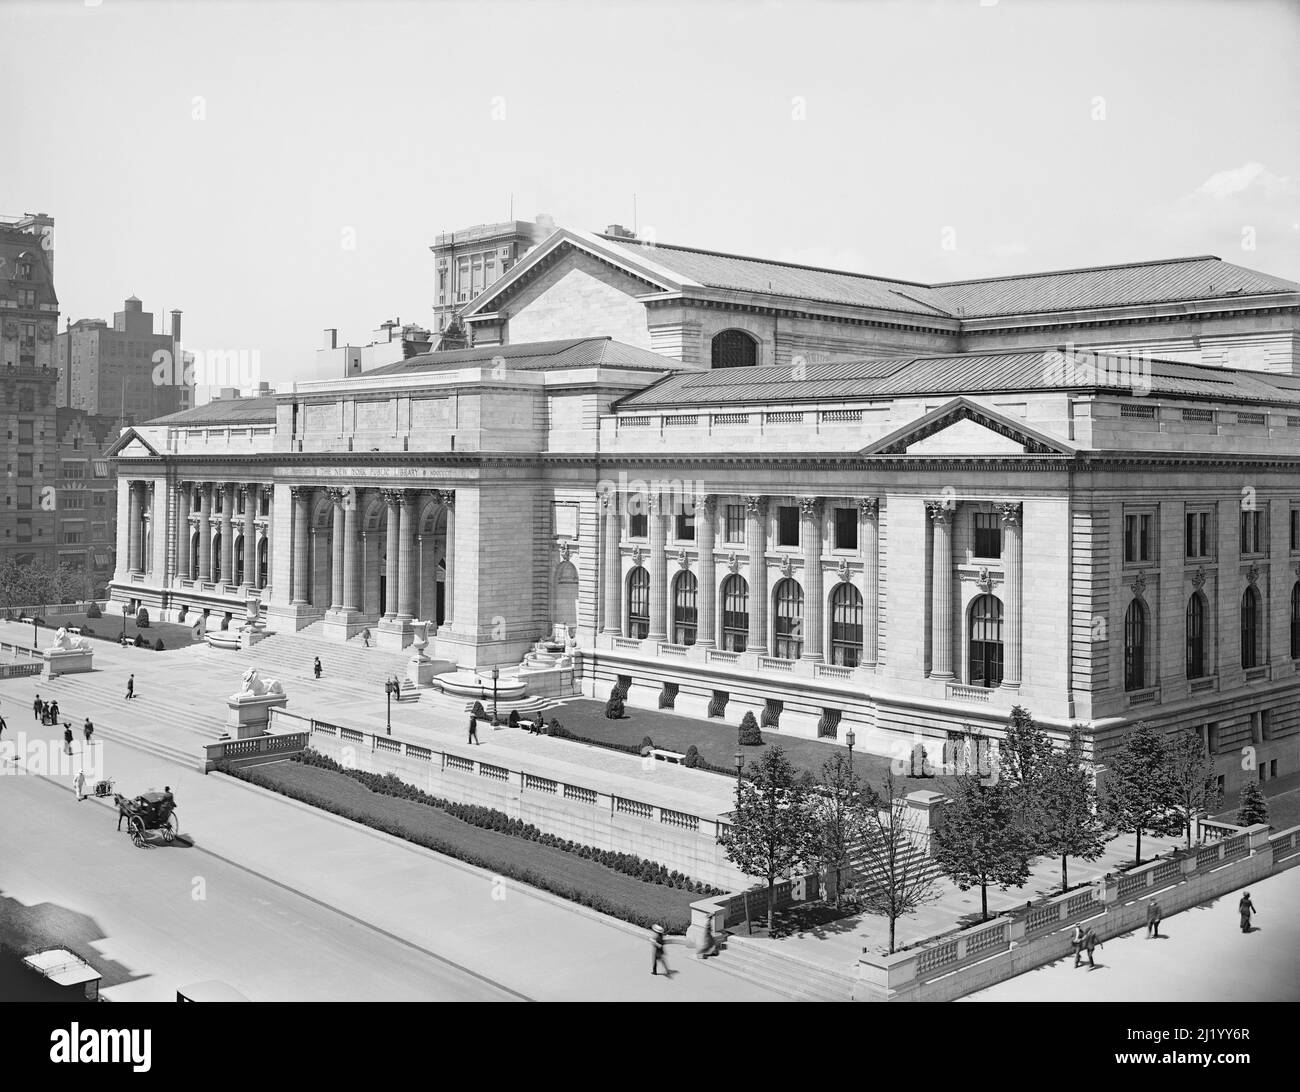 New York Public Library, Fifth Avenue and 42nd Street, New York City, New York, USA, Detroit Publishing Company, 1911 Stock Photo